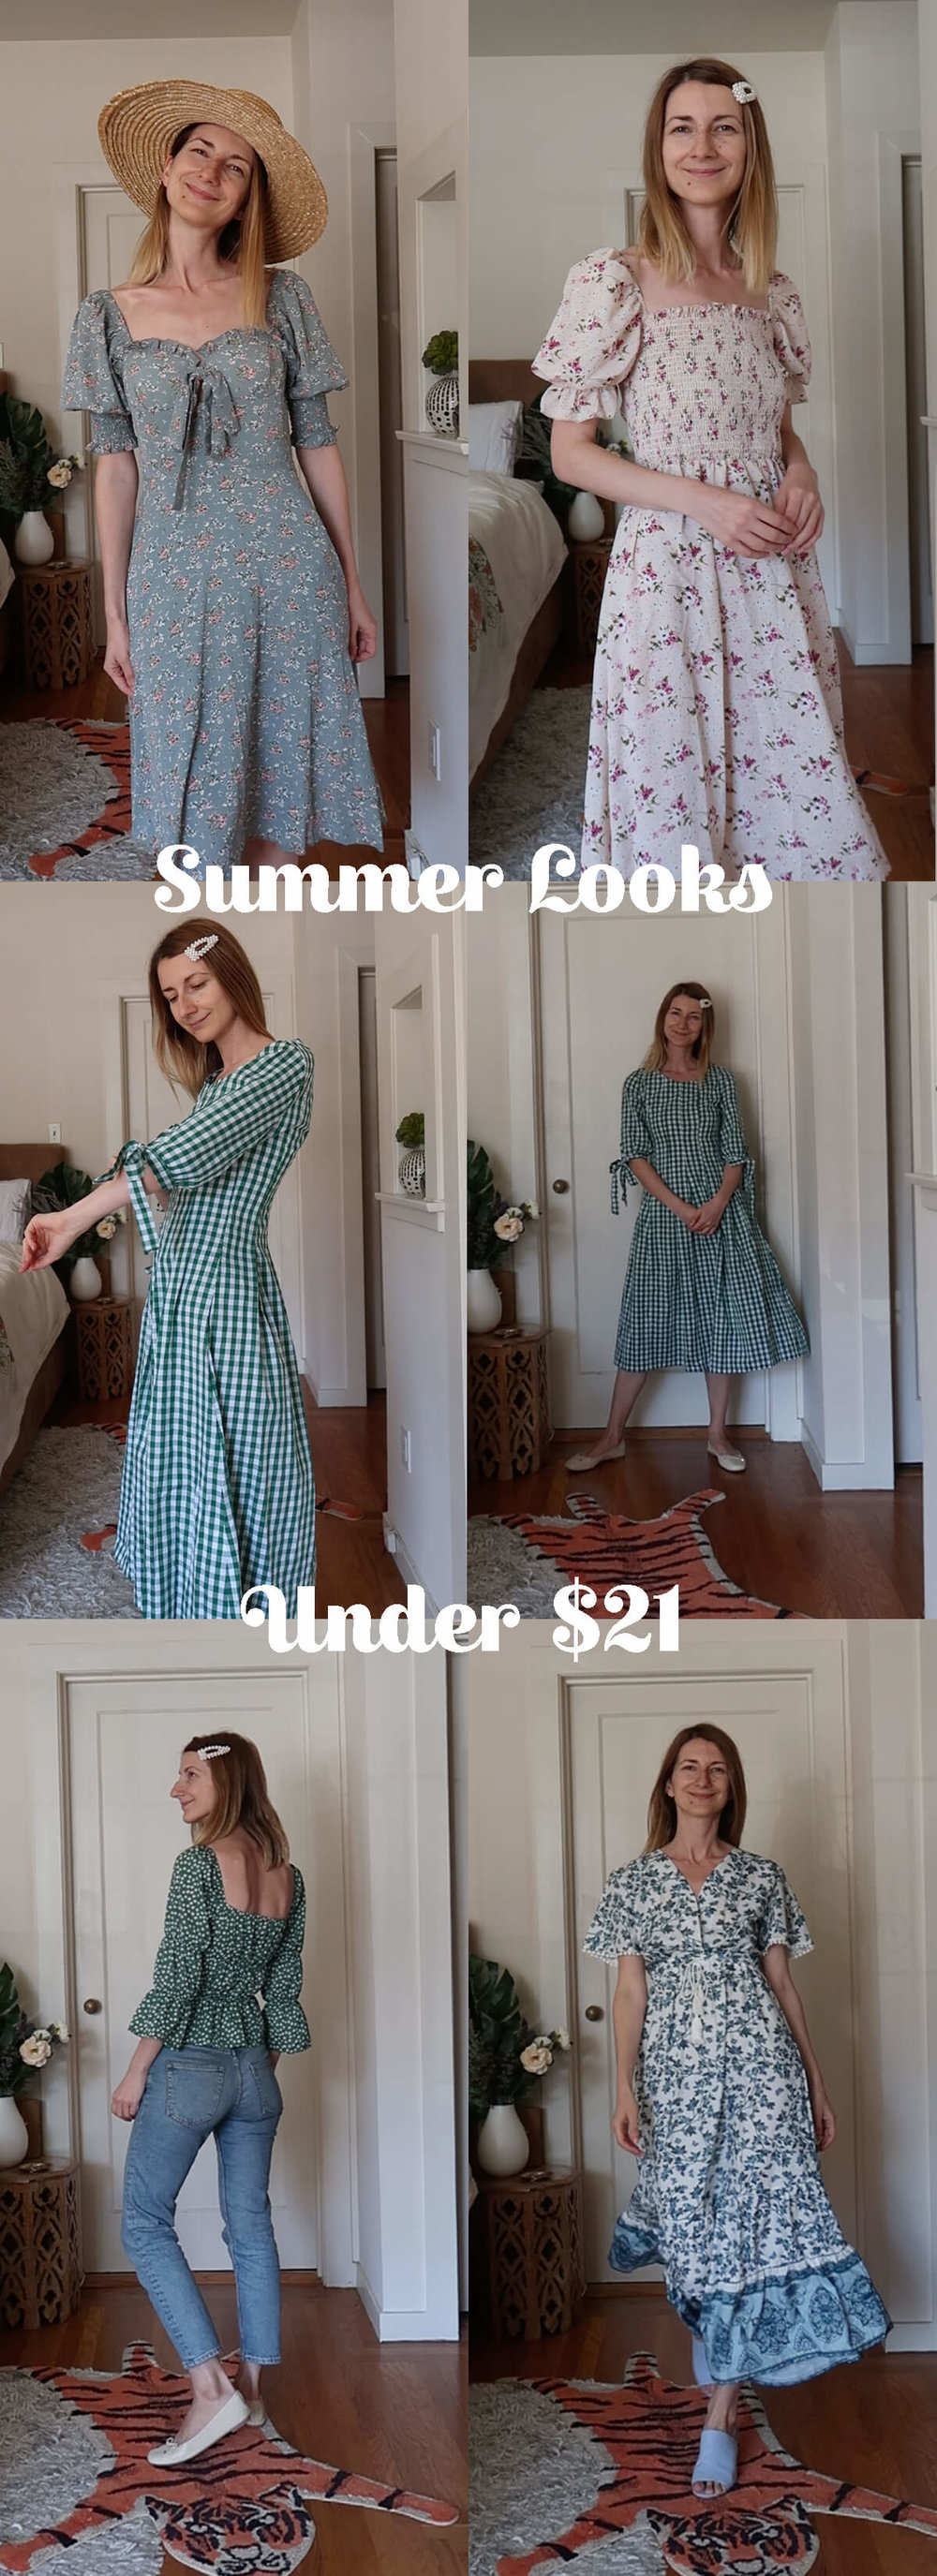 shein summer outfits